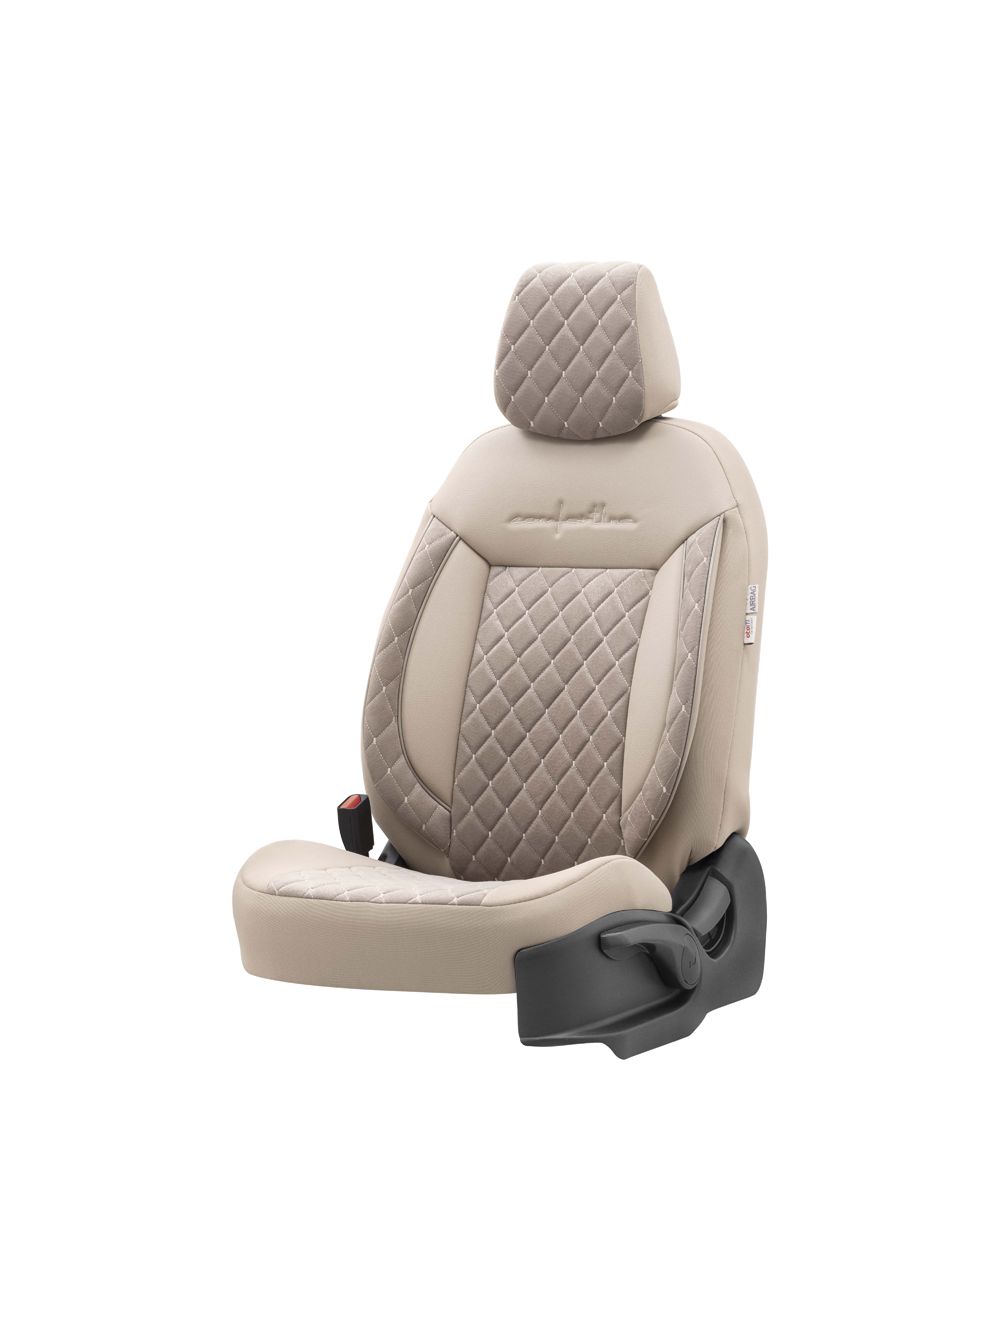 How to Install High Back Front Seat Car Seat Covers (Airbag Compatible)